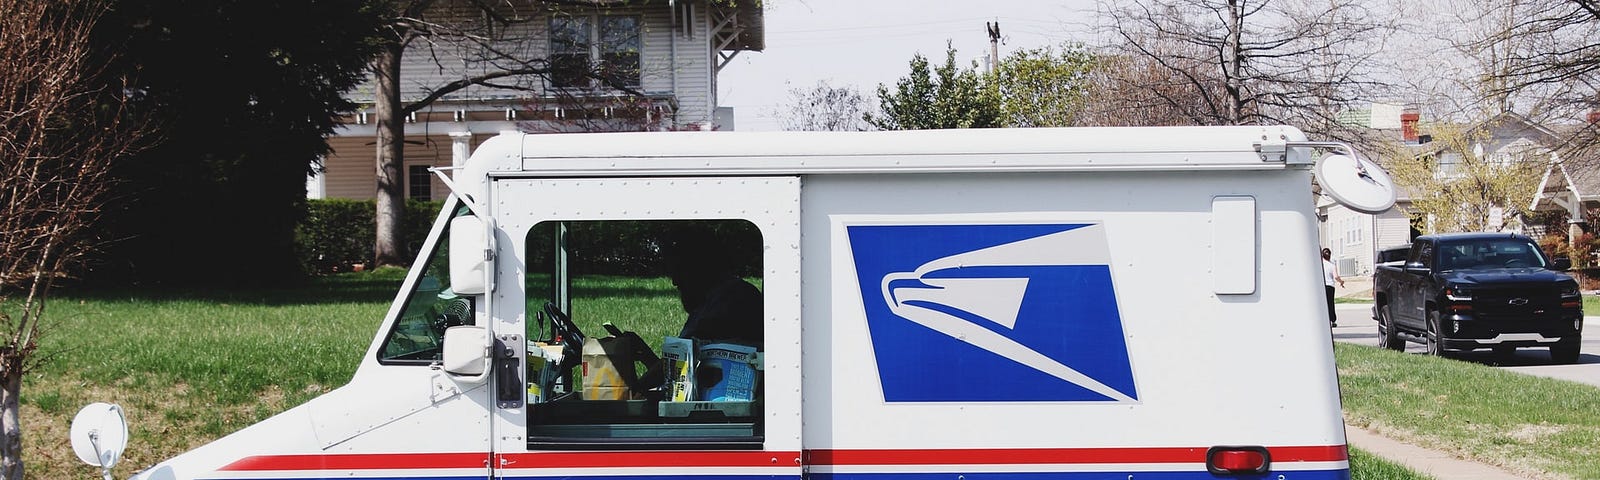 A US Postal Service truck parked on the curb in a residential neighborhood.